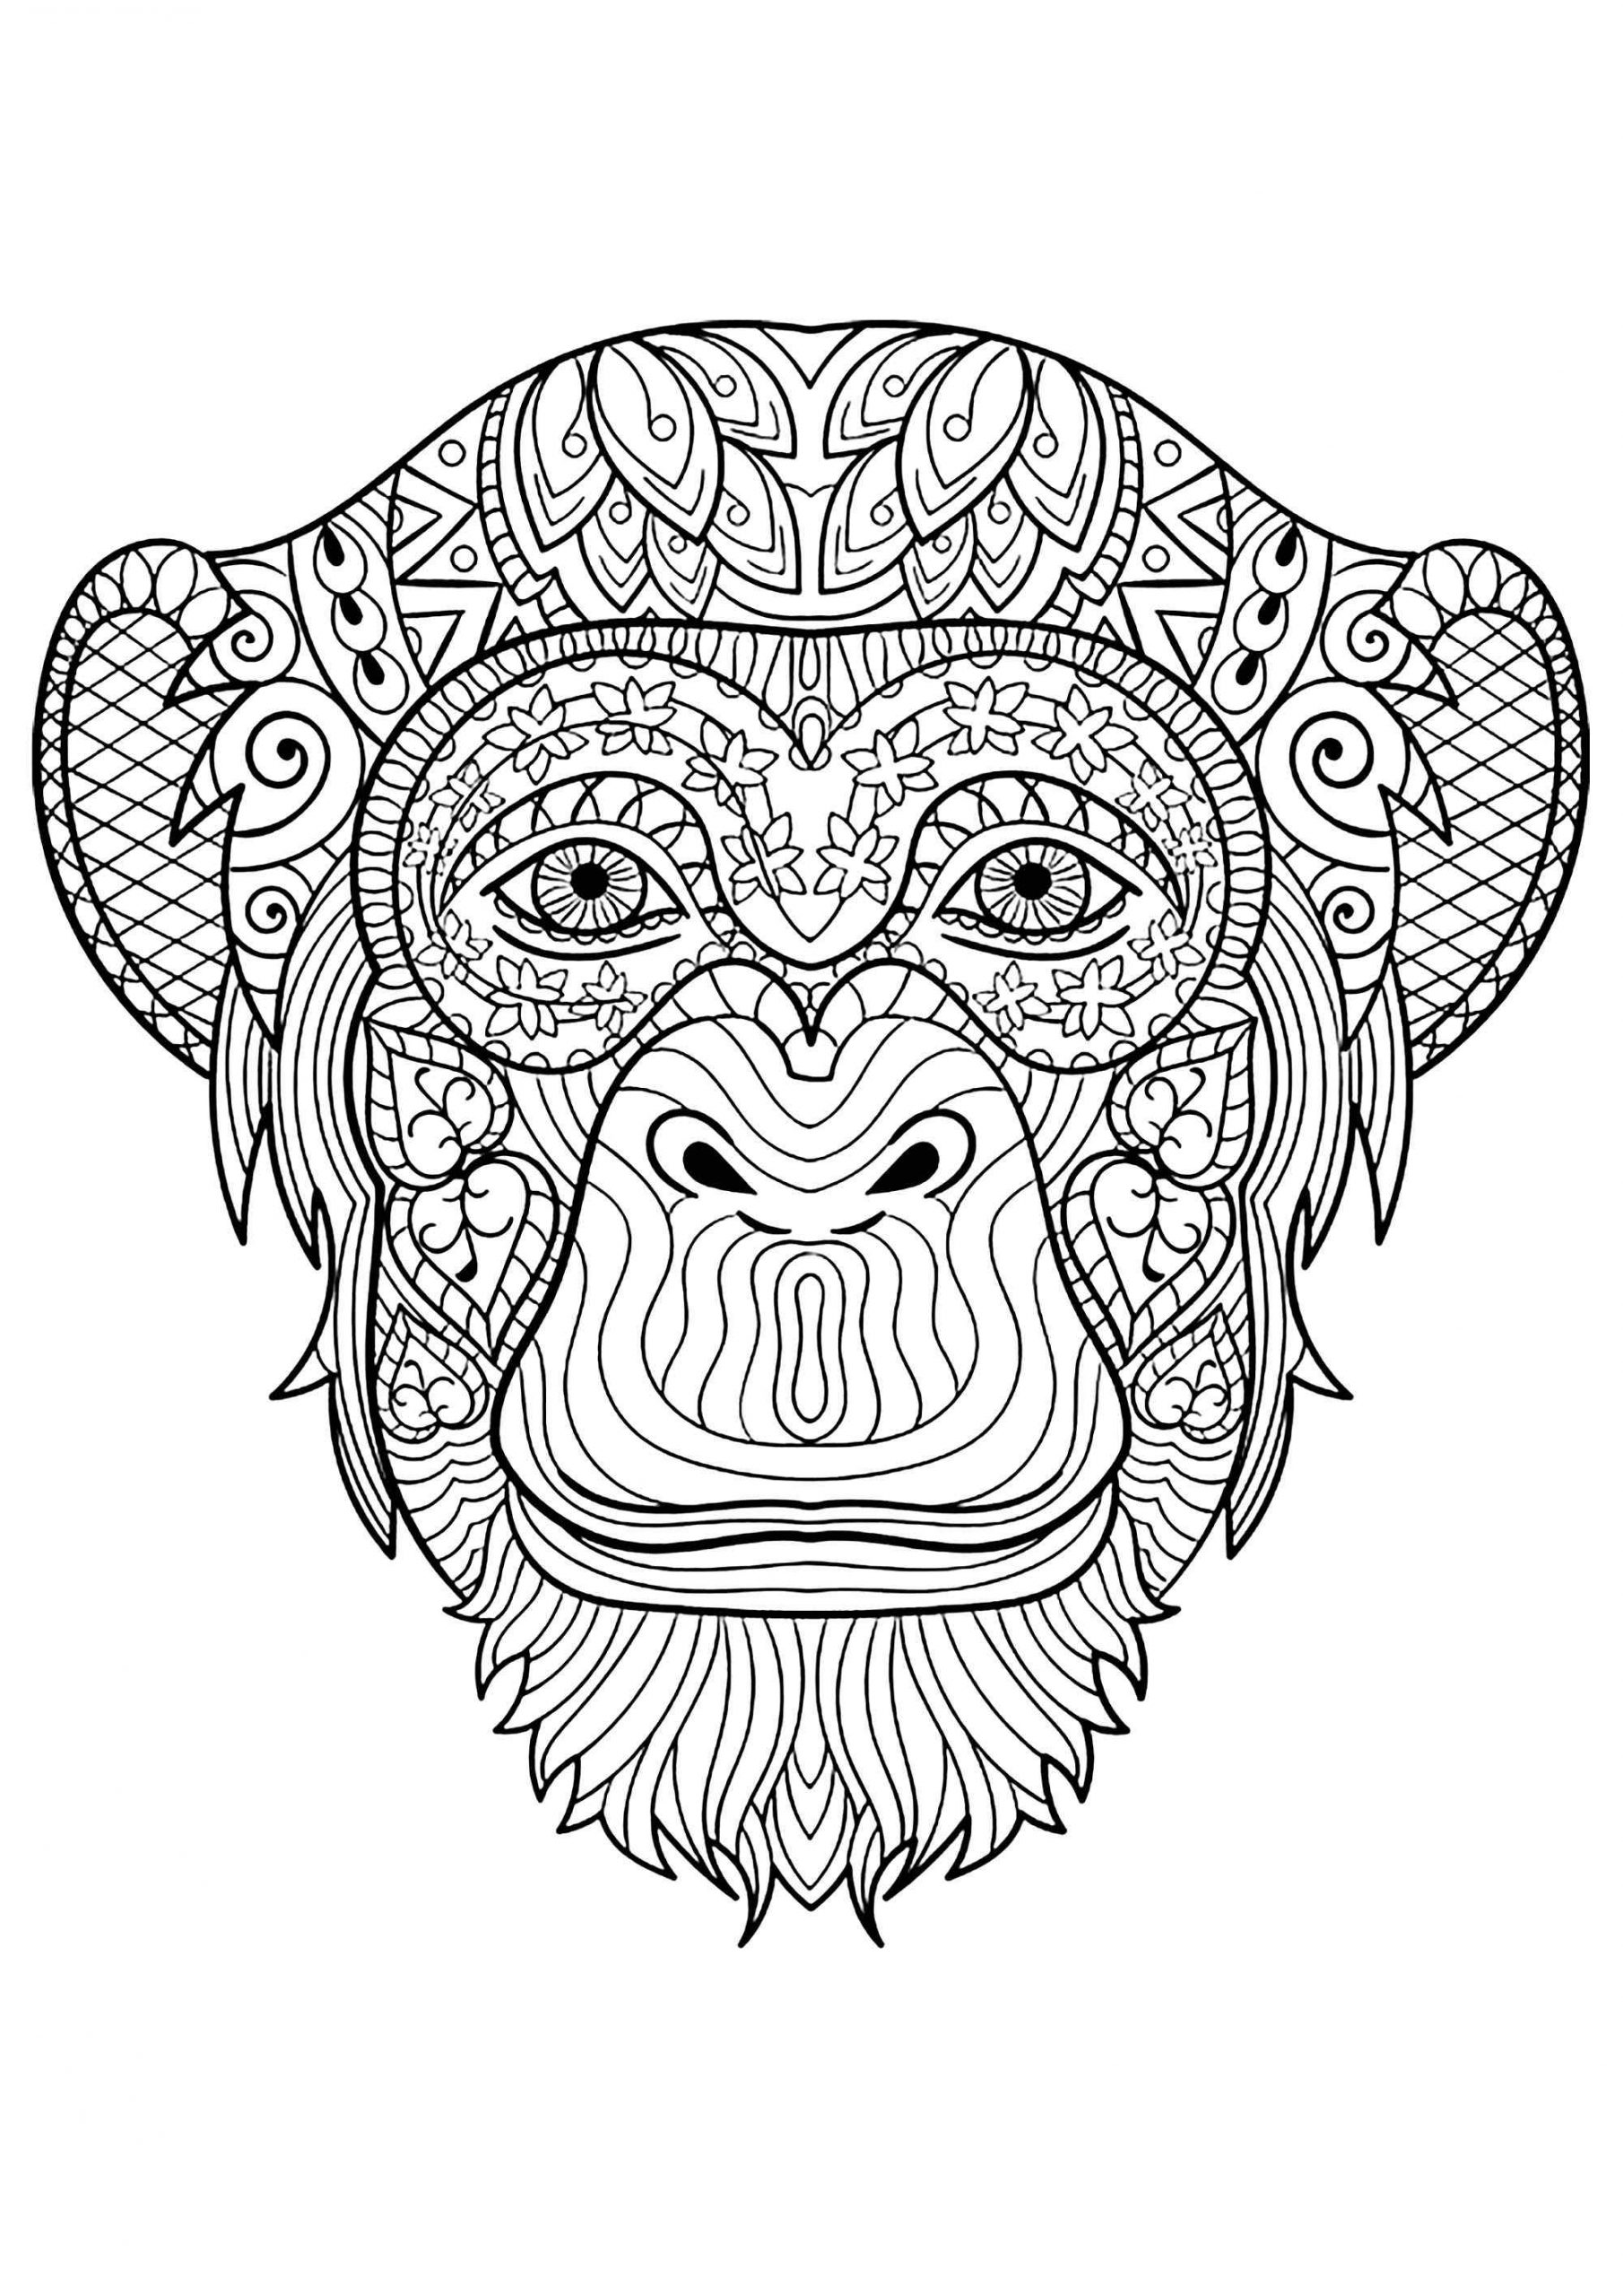 Monkeys To Print Coloring Page